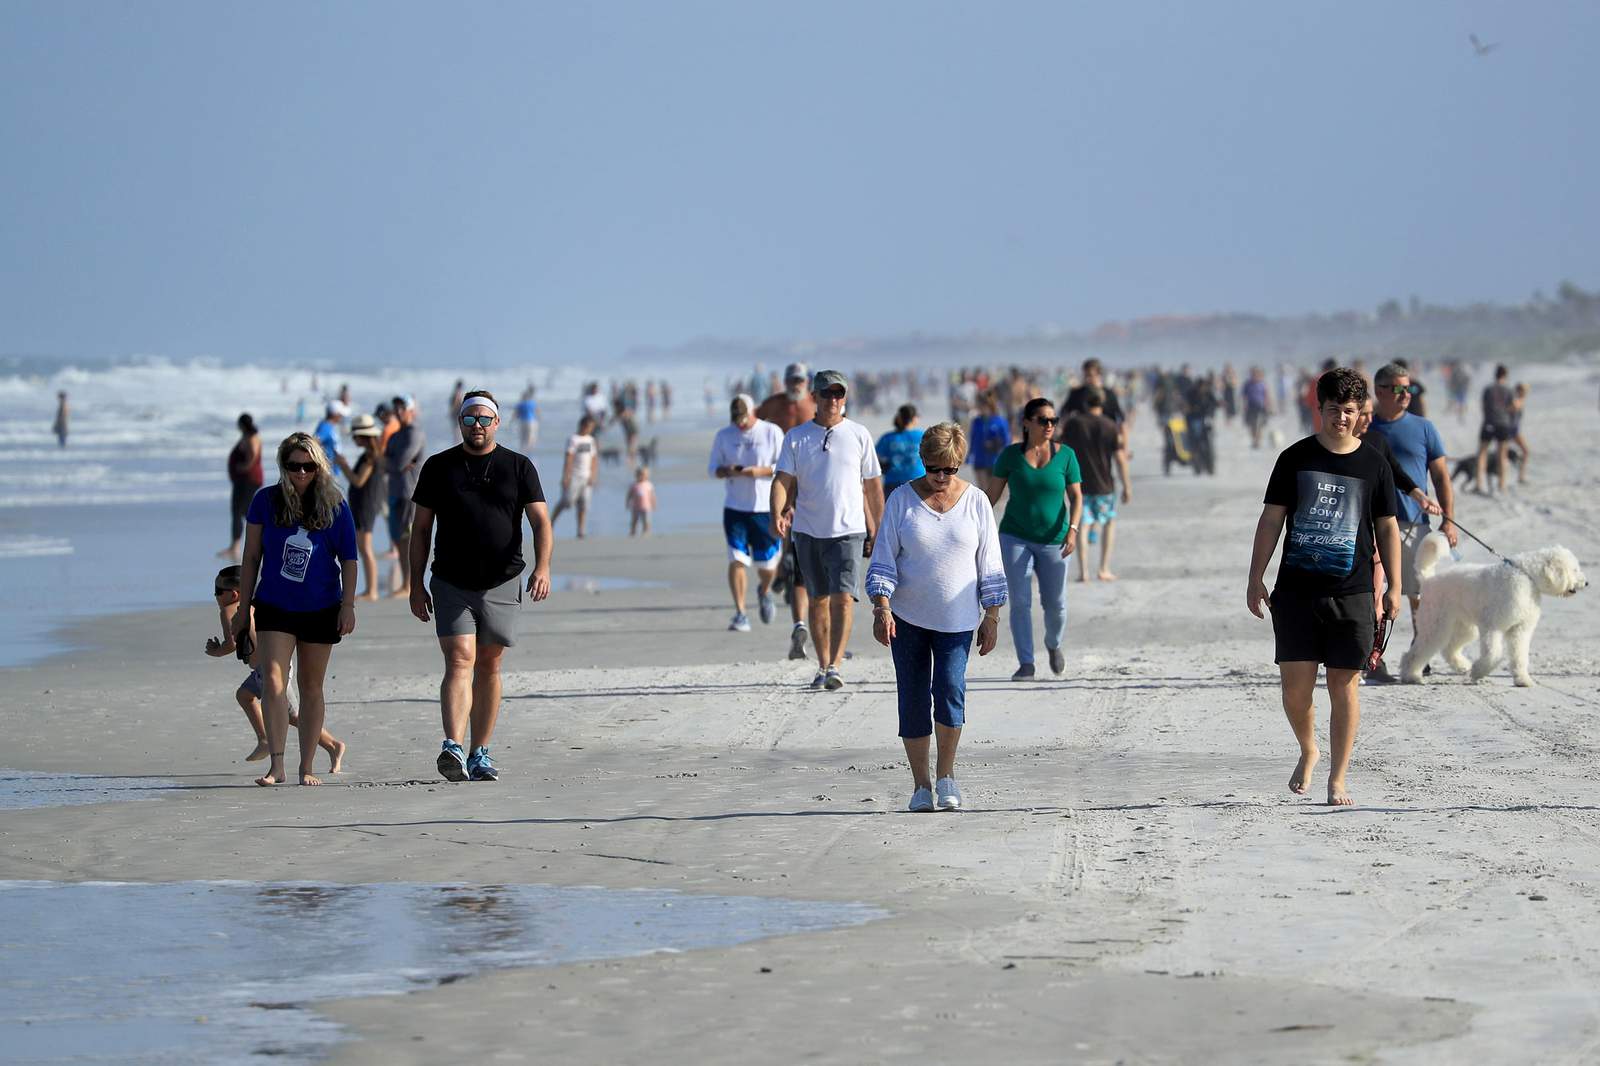 Beaches are reopening. If you go, please be smart about it